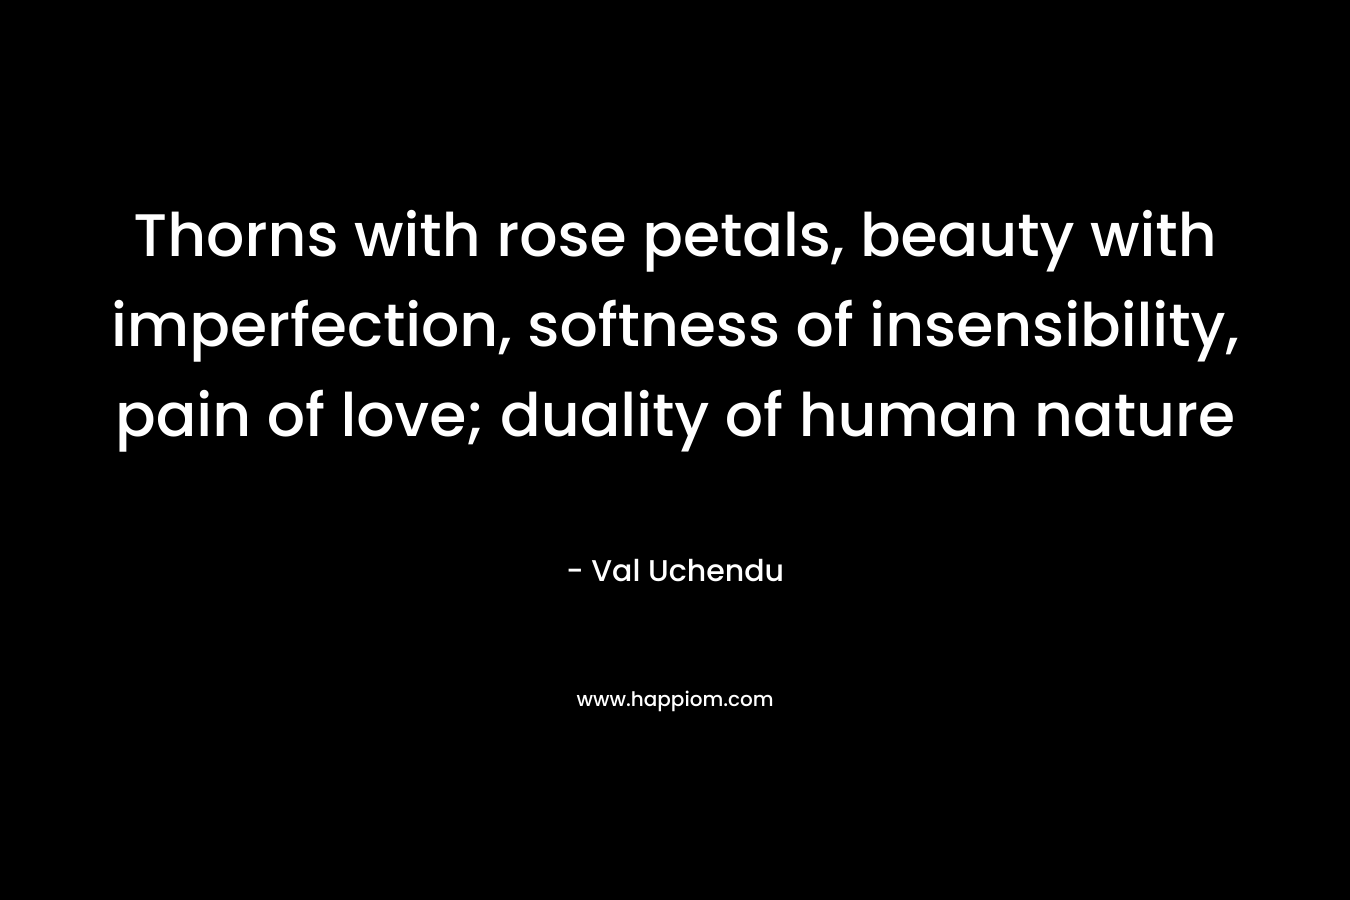 Thorns with rose petals, beauty with imperfection, softness of insensibility, pain of love; duality of human nature – Val Uchendu